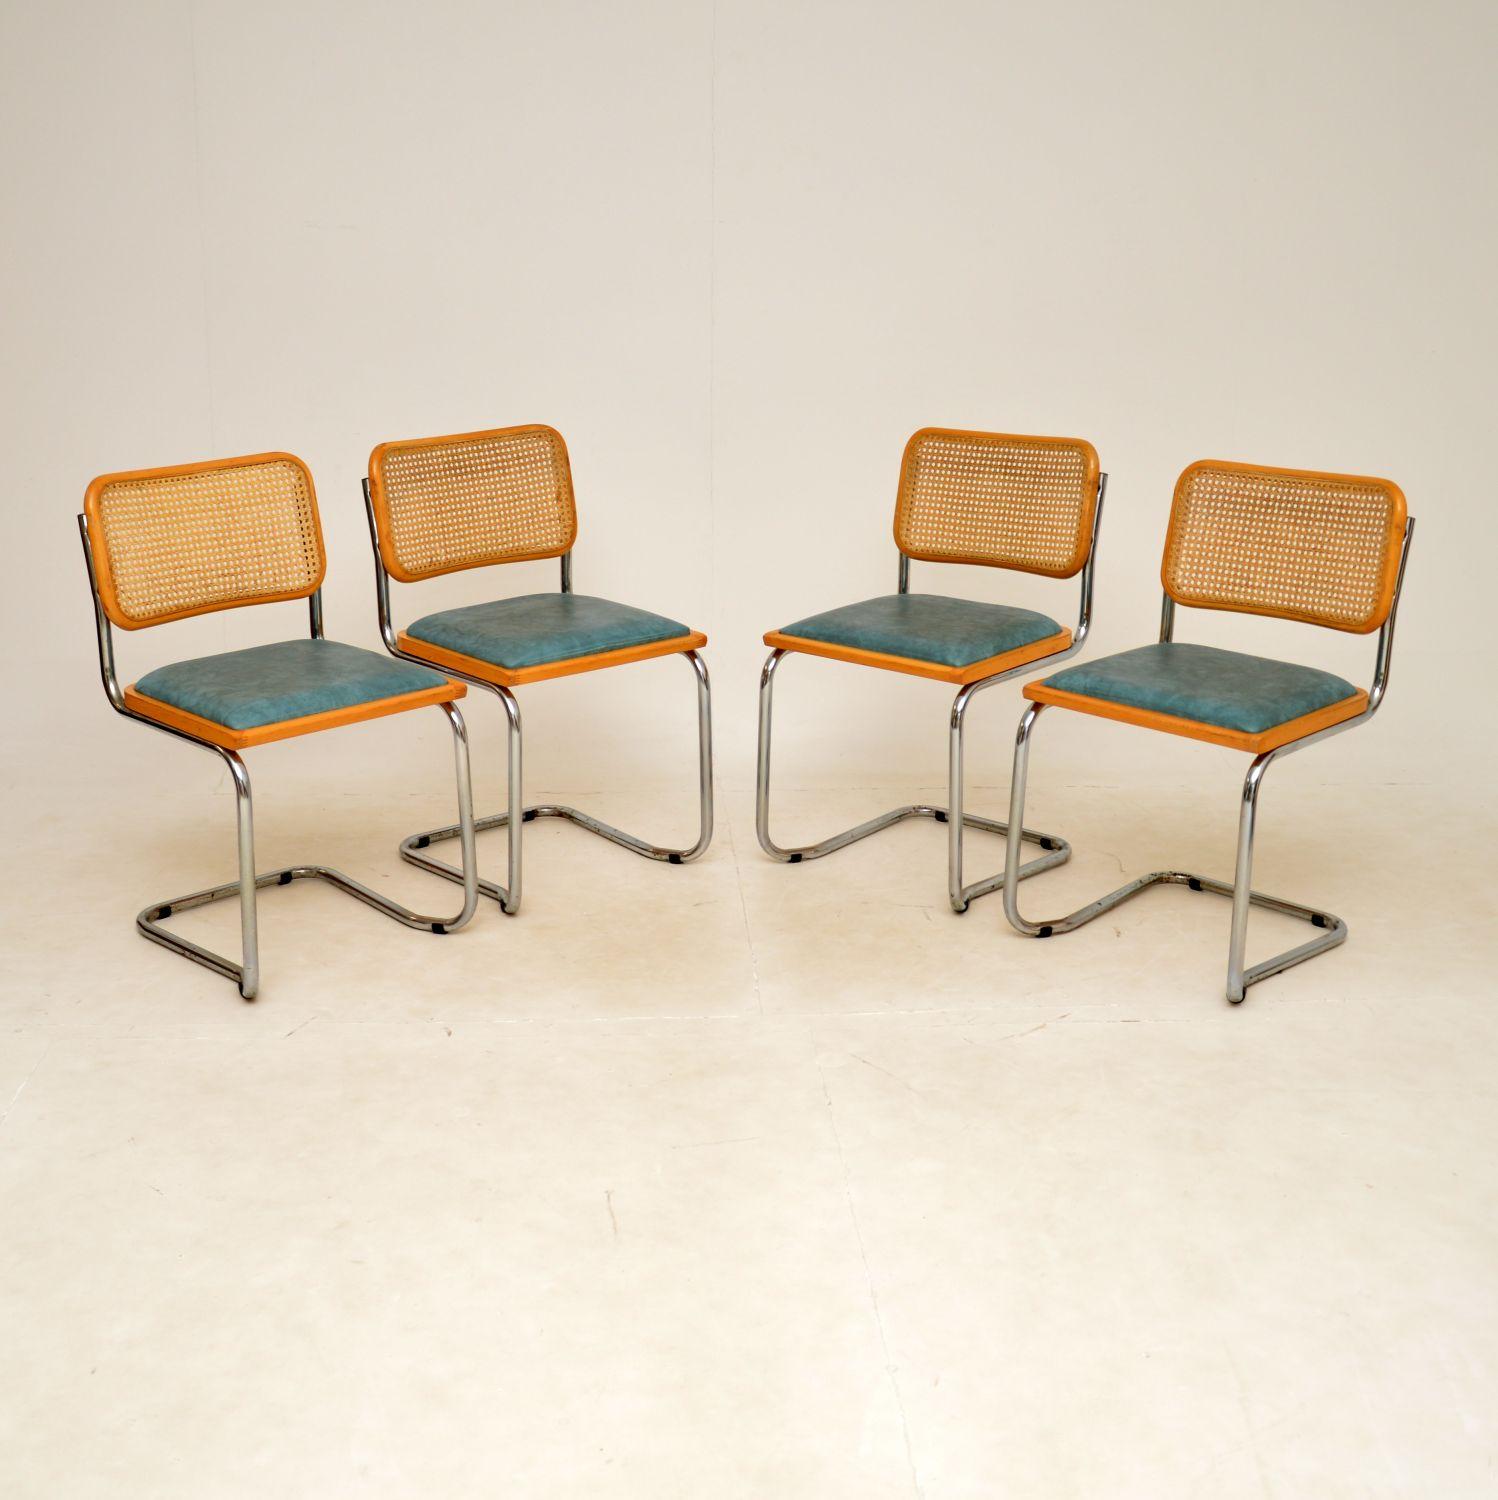 A stylish and iconic set of ‘Cesca’ dining chairs, originally designed by Marcel Breuer in the 1920s. These were made in Italy, they date from around the 1970s.

They are extremely well made, and are very comfortable, the cantilevered base gives